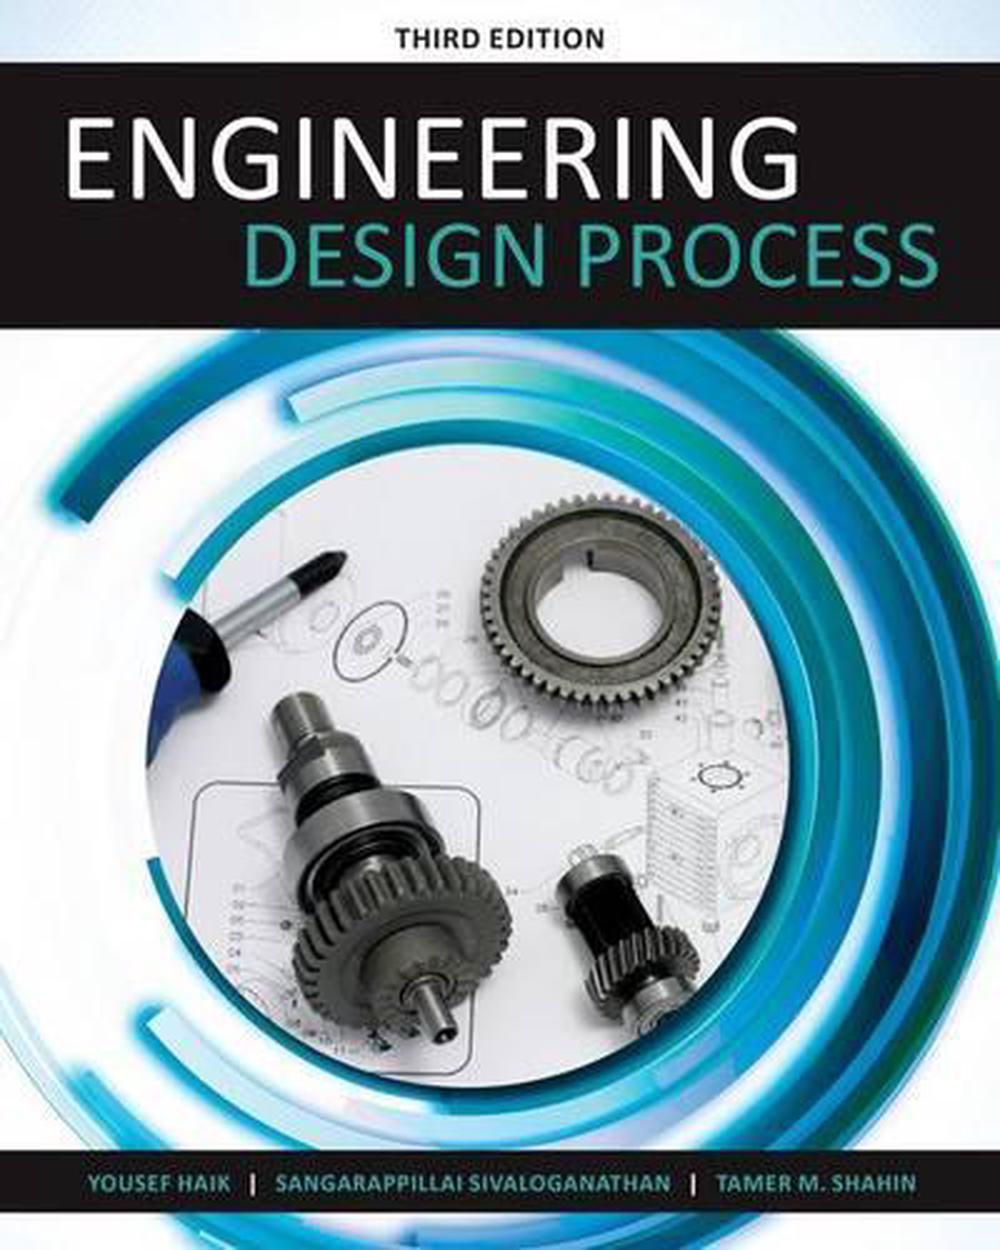 pdf engineering design process 3rd edition by yousef haik